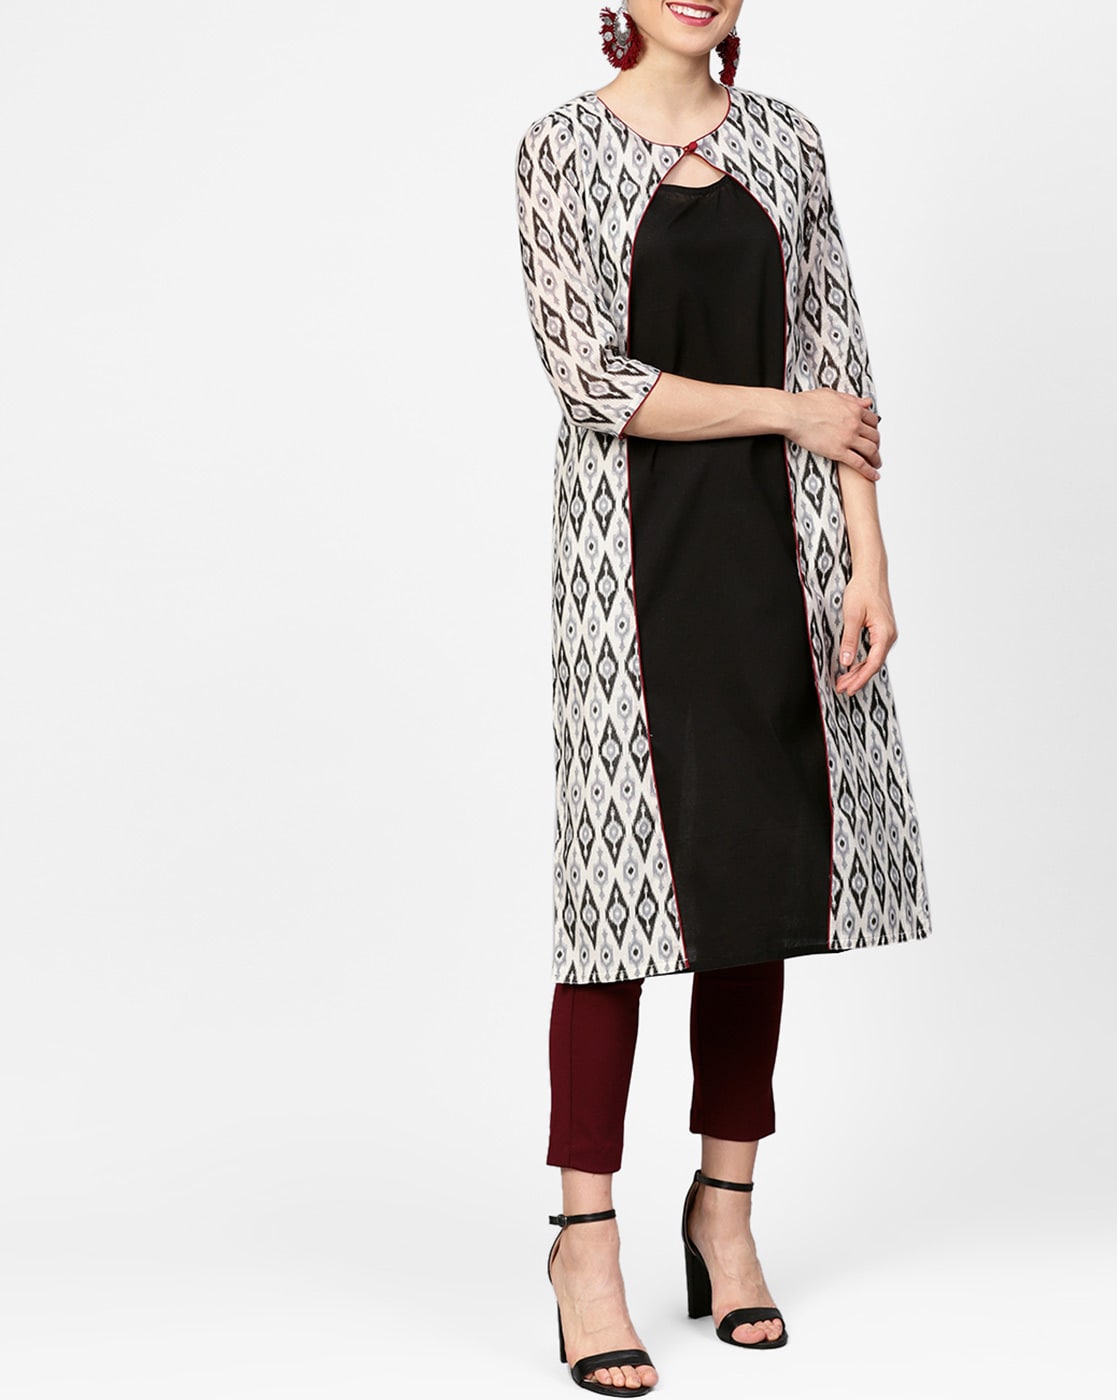 Discover 90+ front open kurti online india super hot